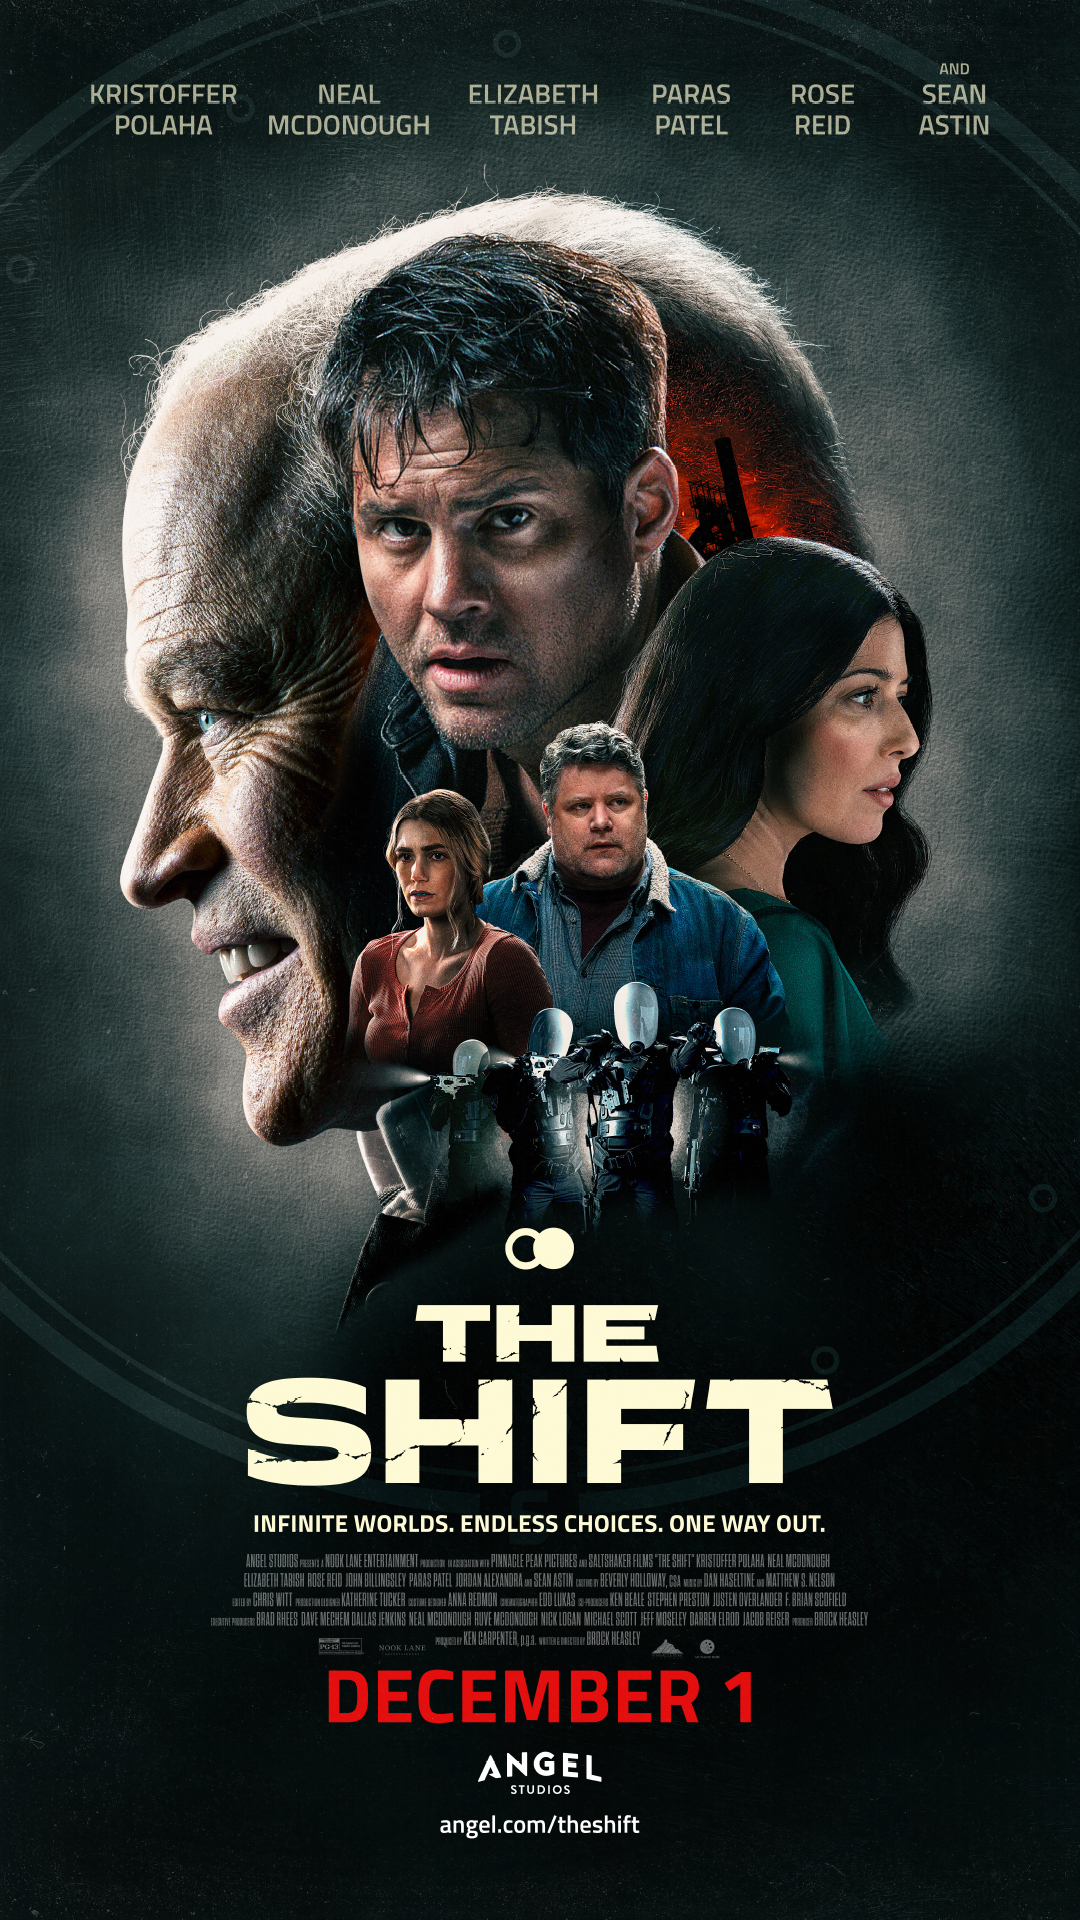 THE SHIFT POSTER 1080x1920